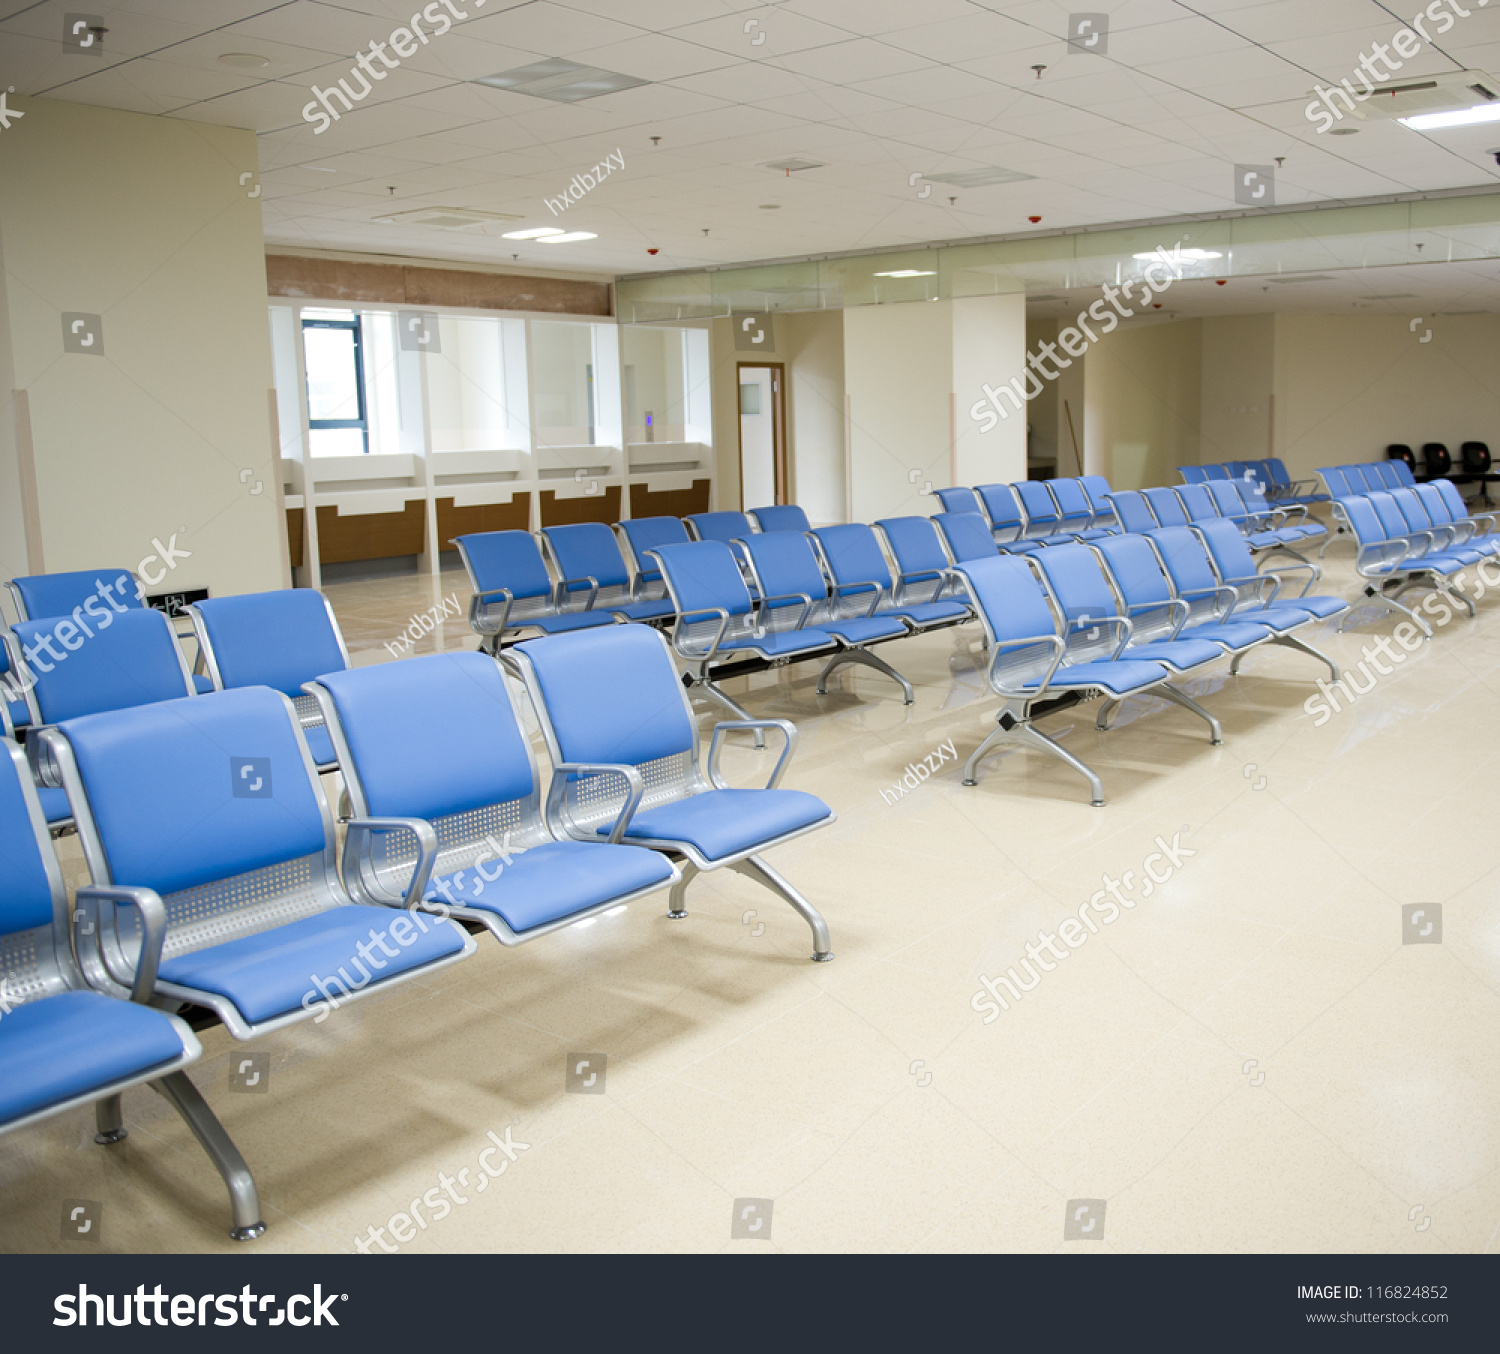 doctor s waiting room essay writer